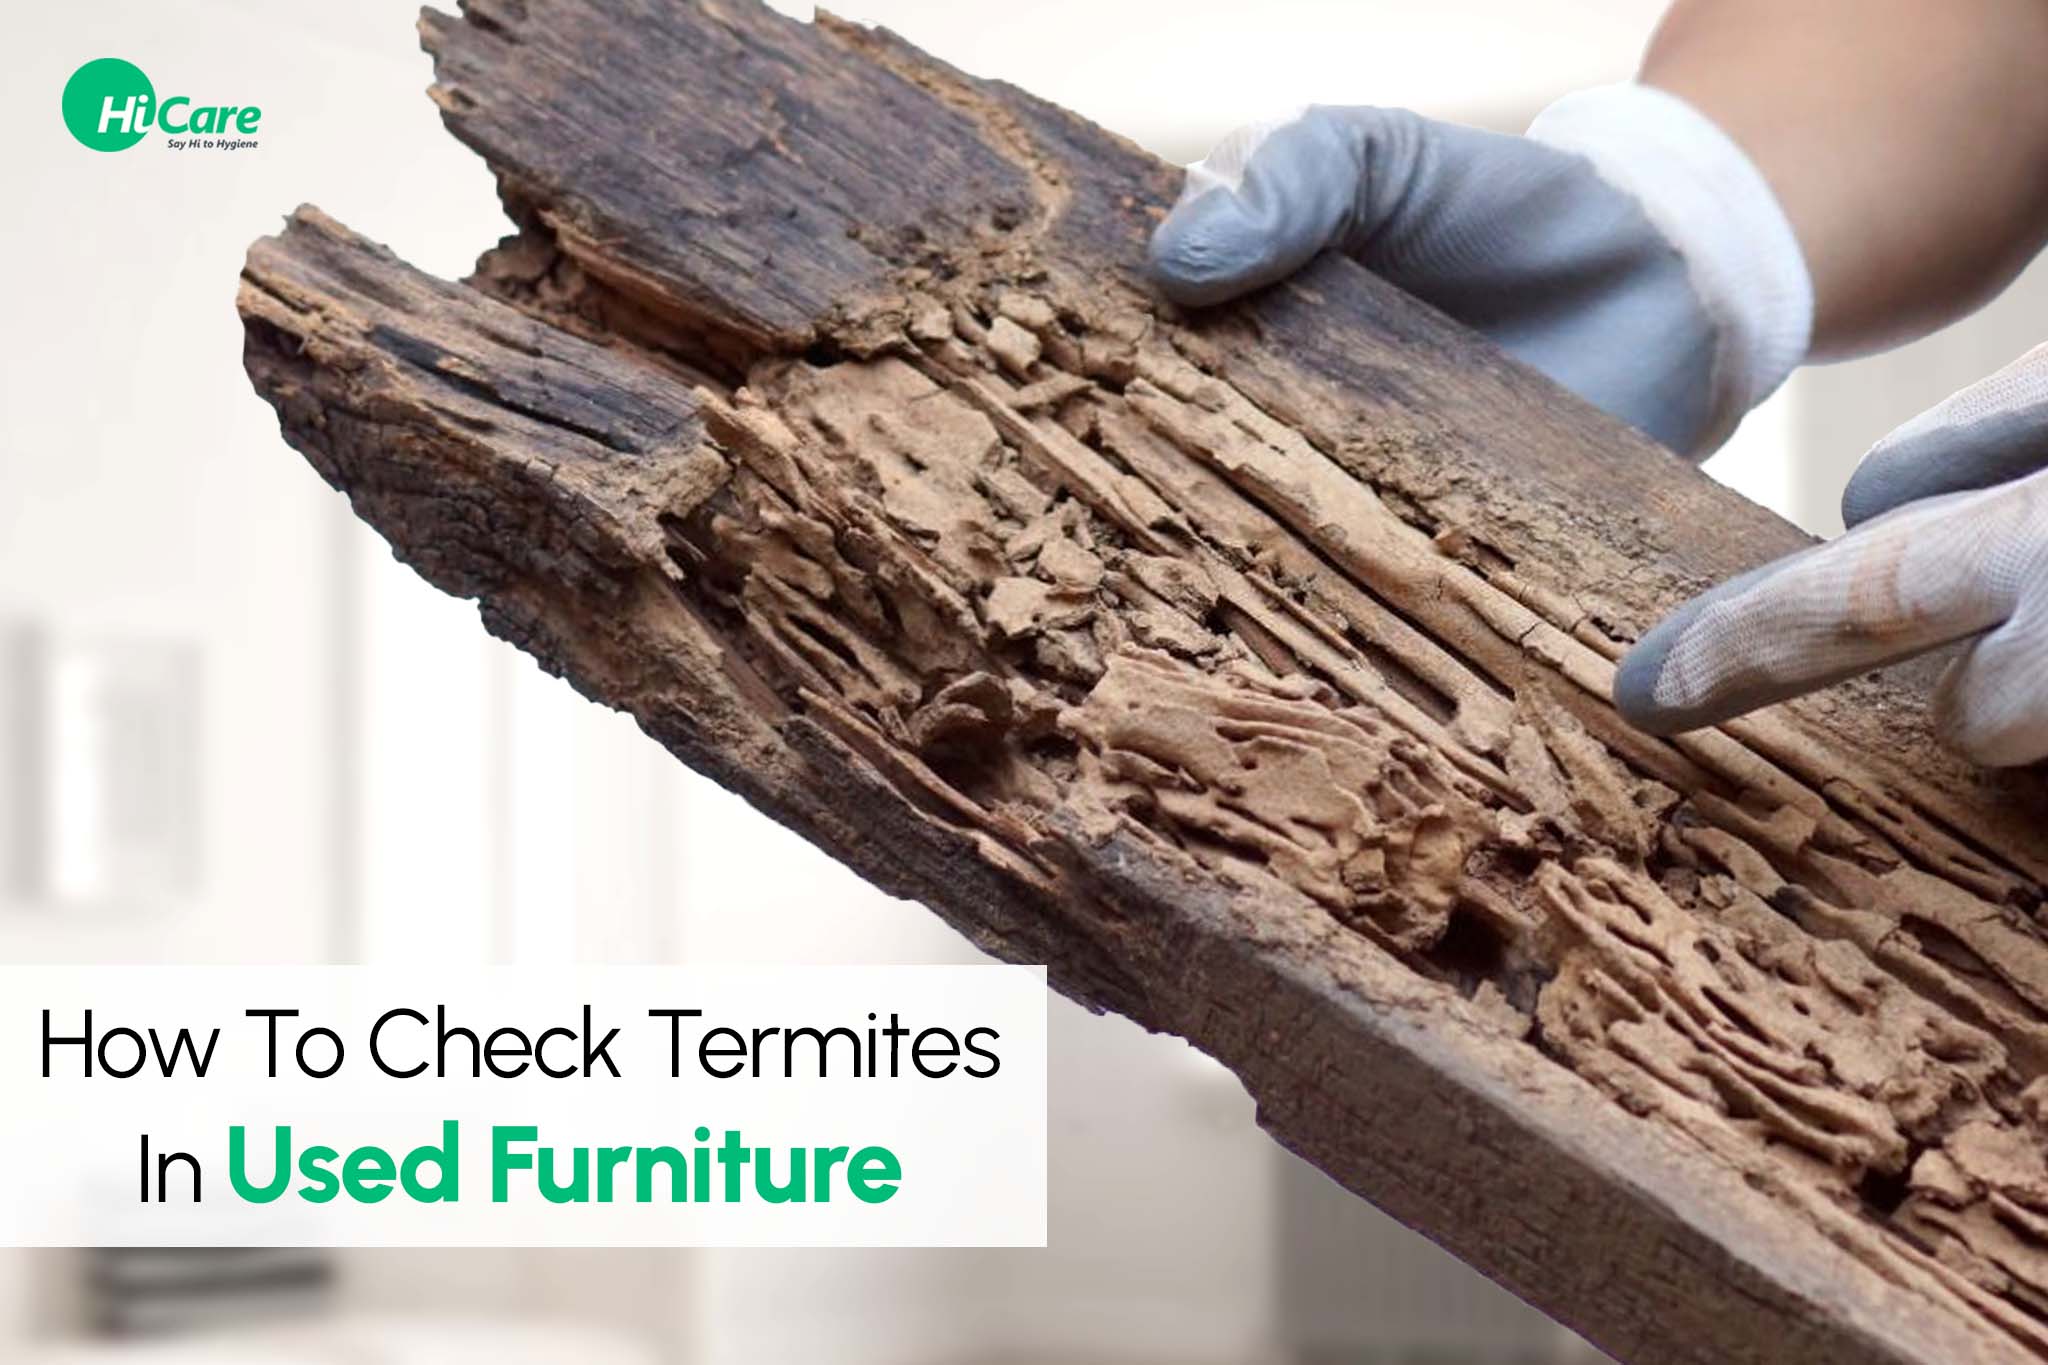 How To Check Termites In Used Furniture